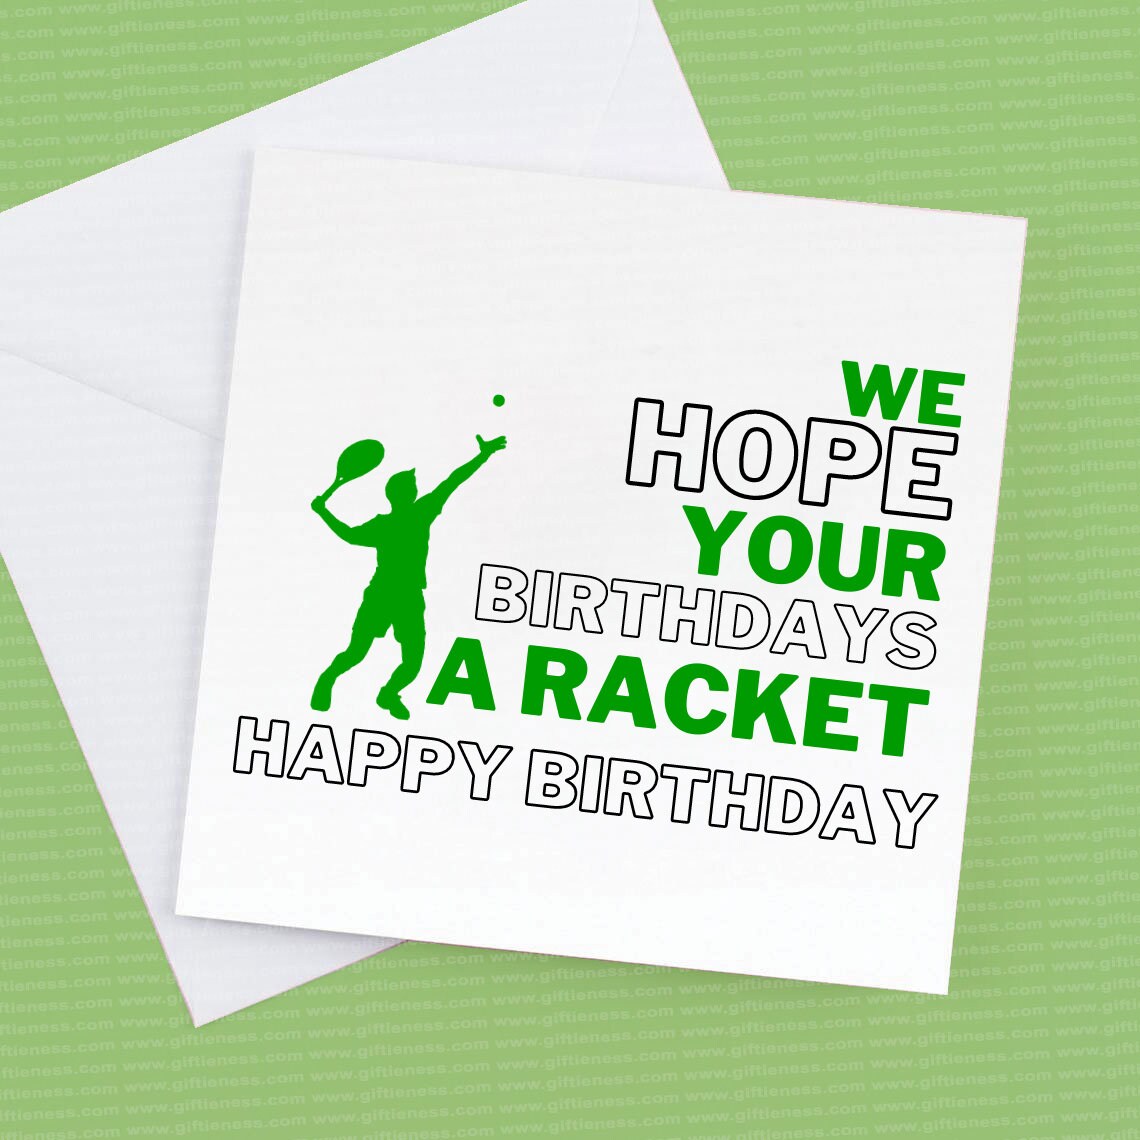 We hope your birthdays a racket card for the tennis player